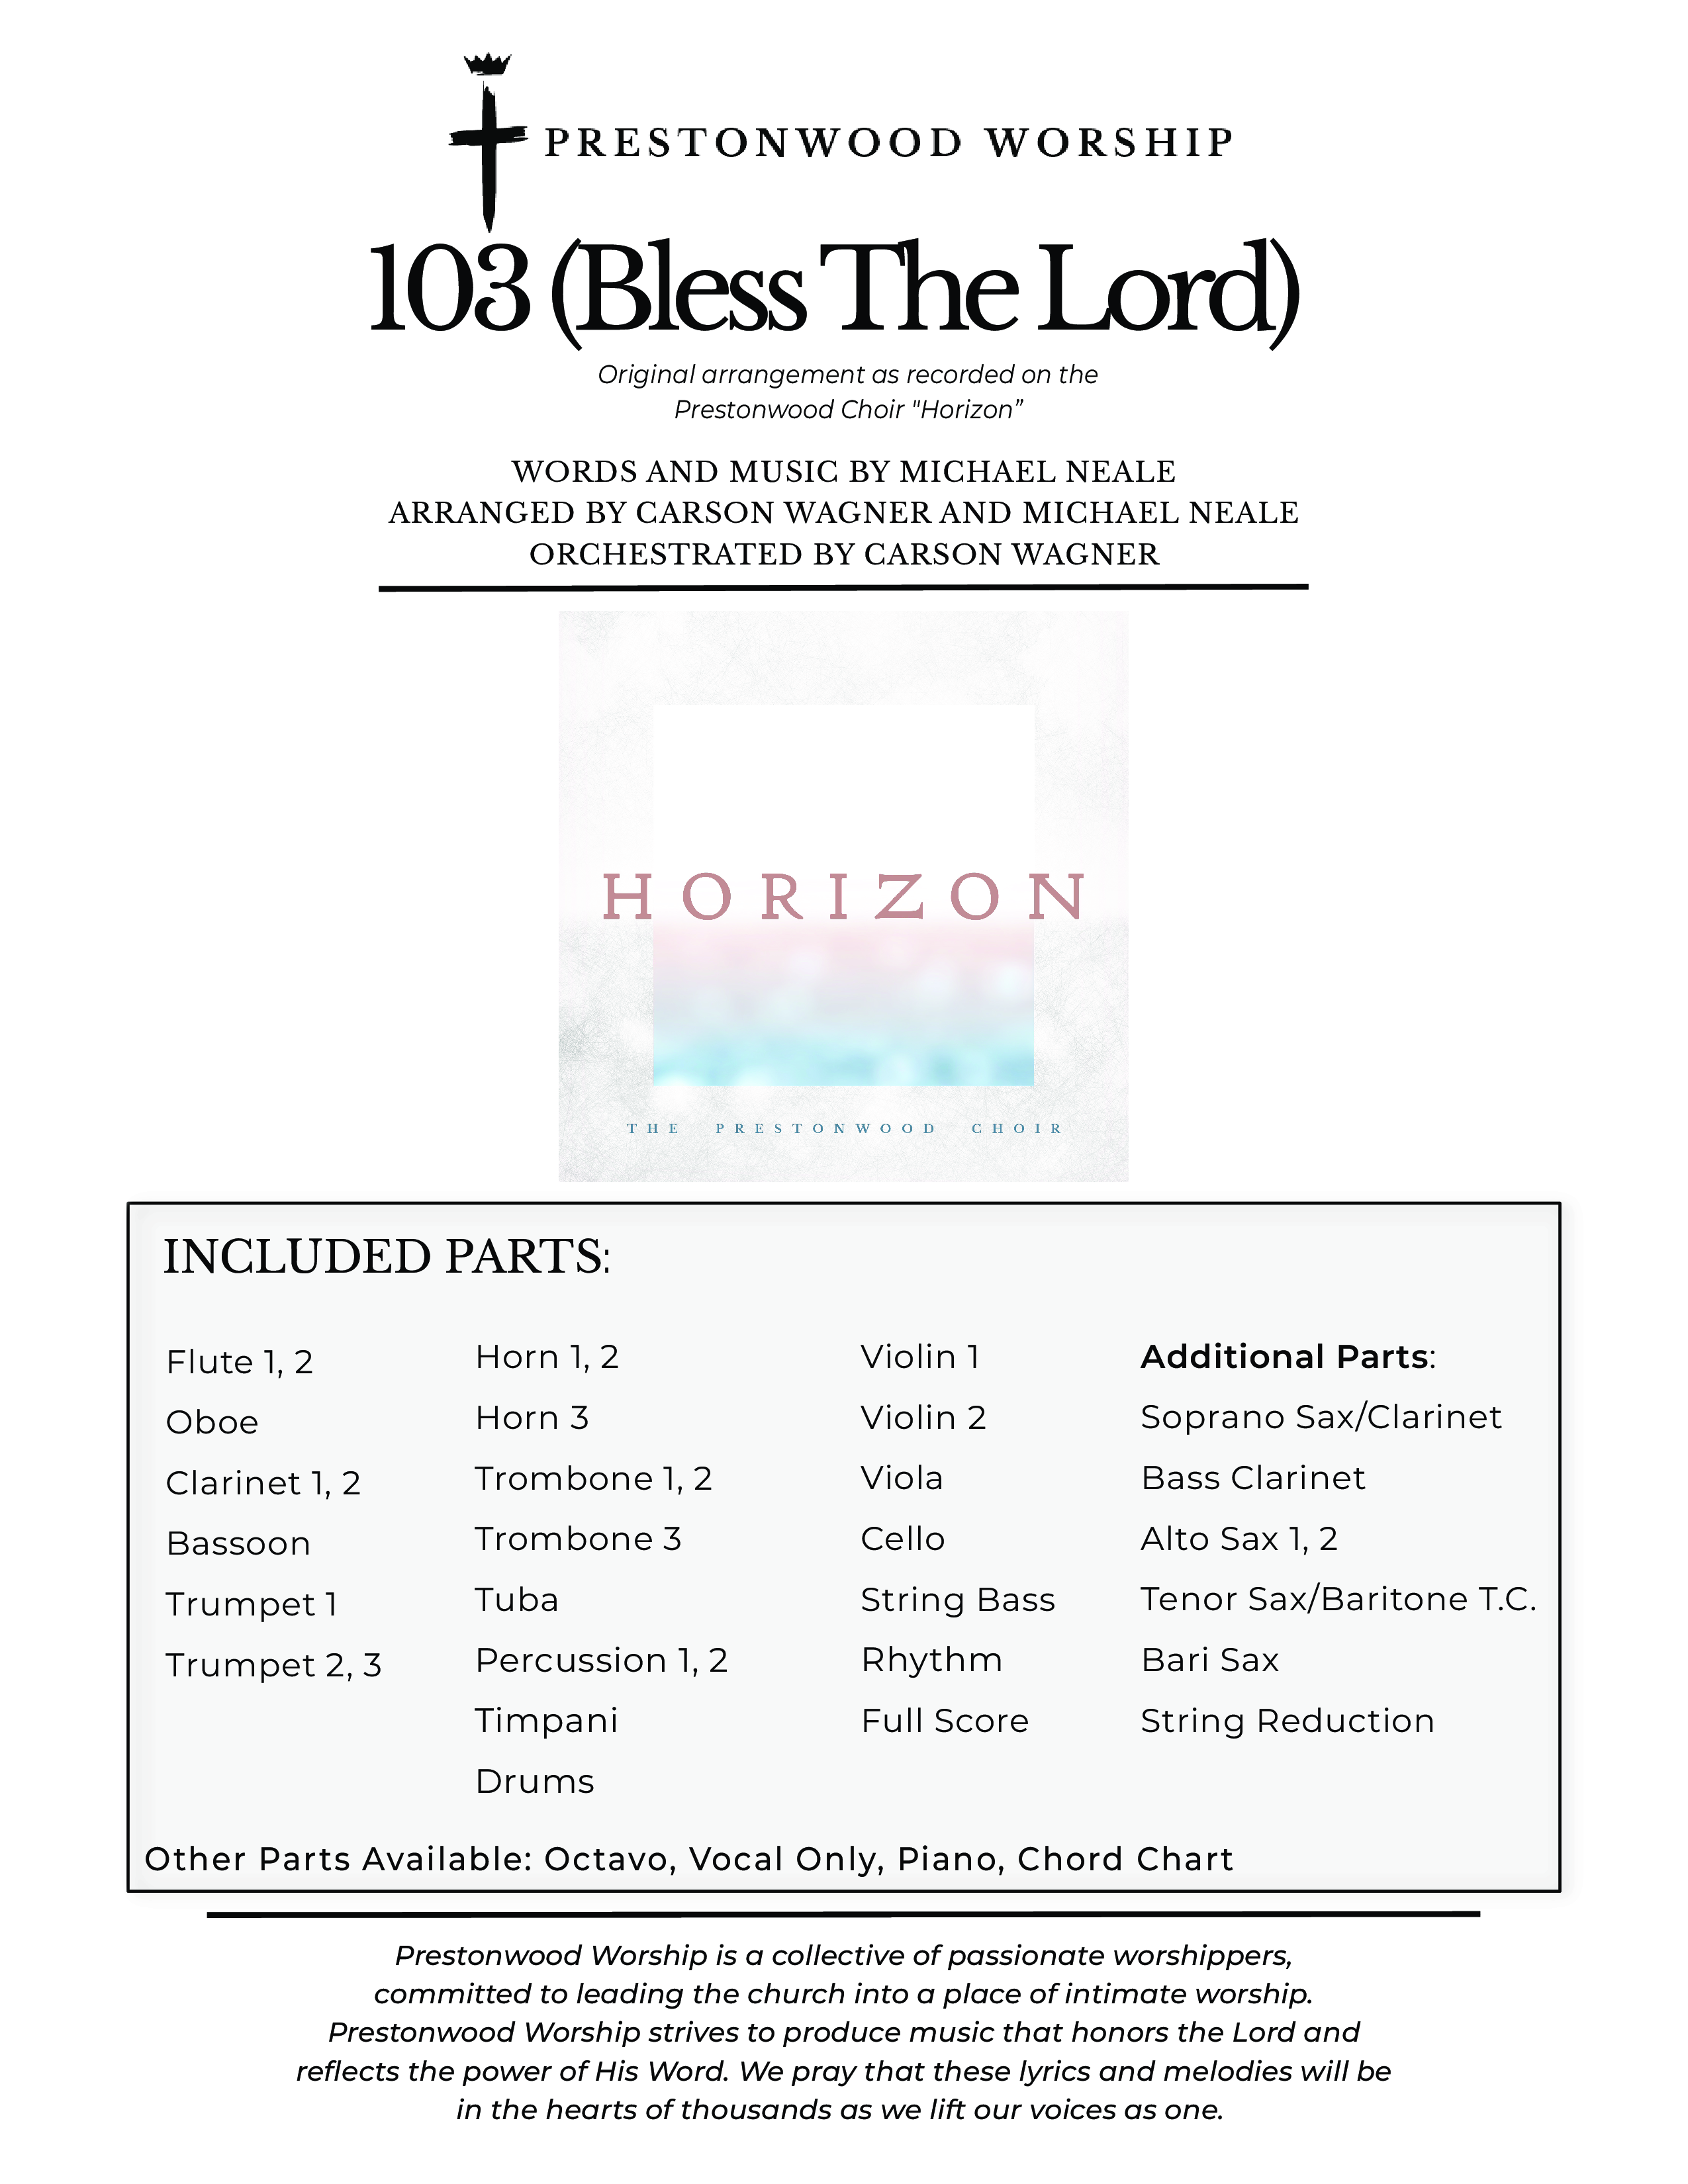 103 (Bless The Lord) (Choral Anthem SATB) Orchestration (Prestonwood Worship / Prestonwood Choir / Arr. Michael Neale / Orch. Carson Wagner)